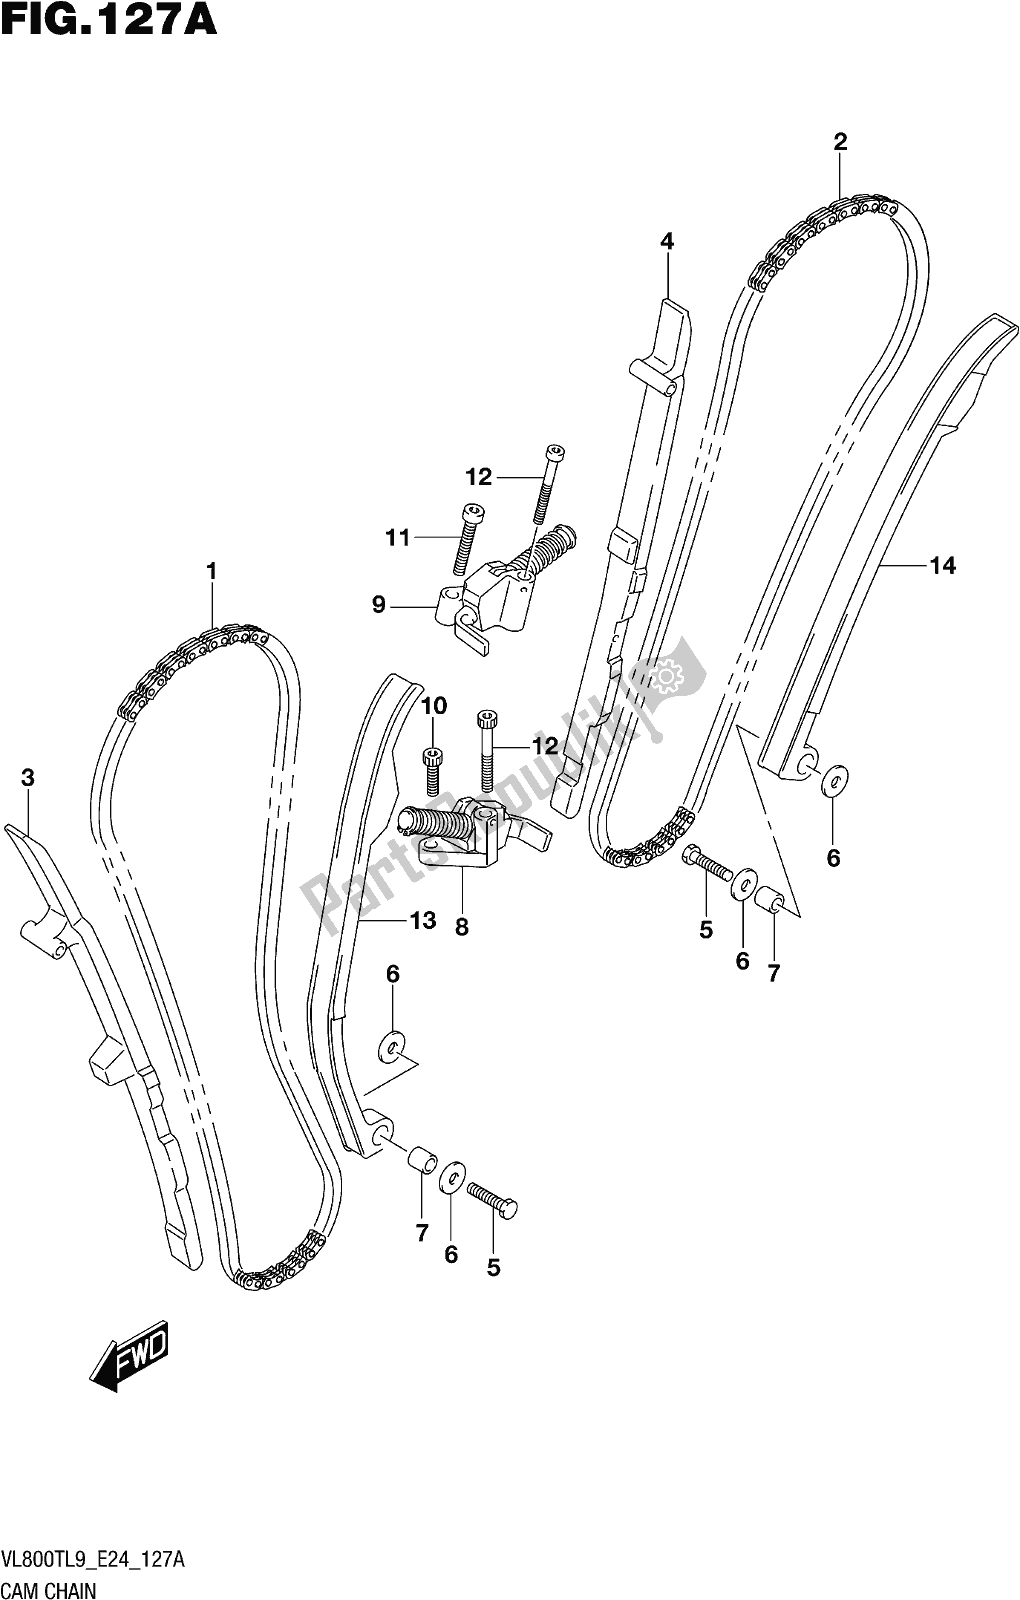 All parts for the Fig. 127a Cam Chain of the Suzuki VL 800T 2019